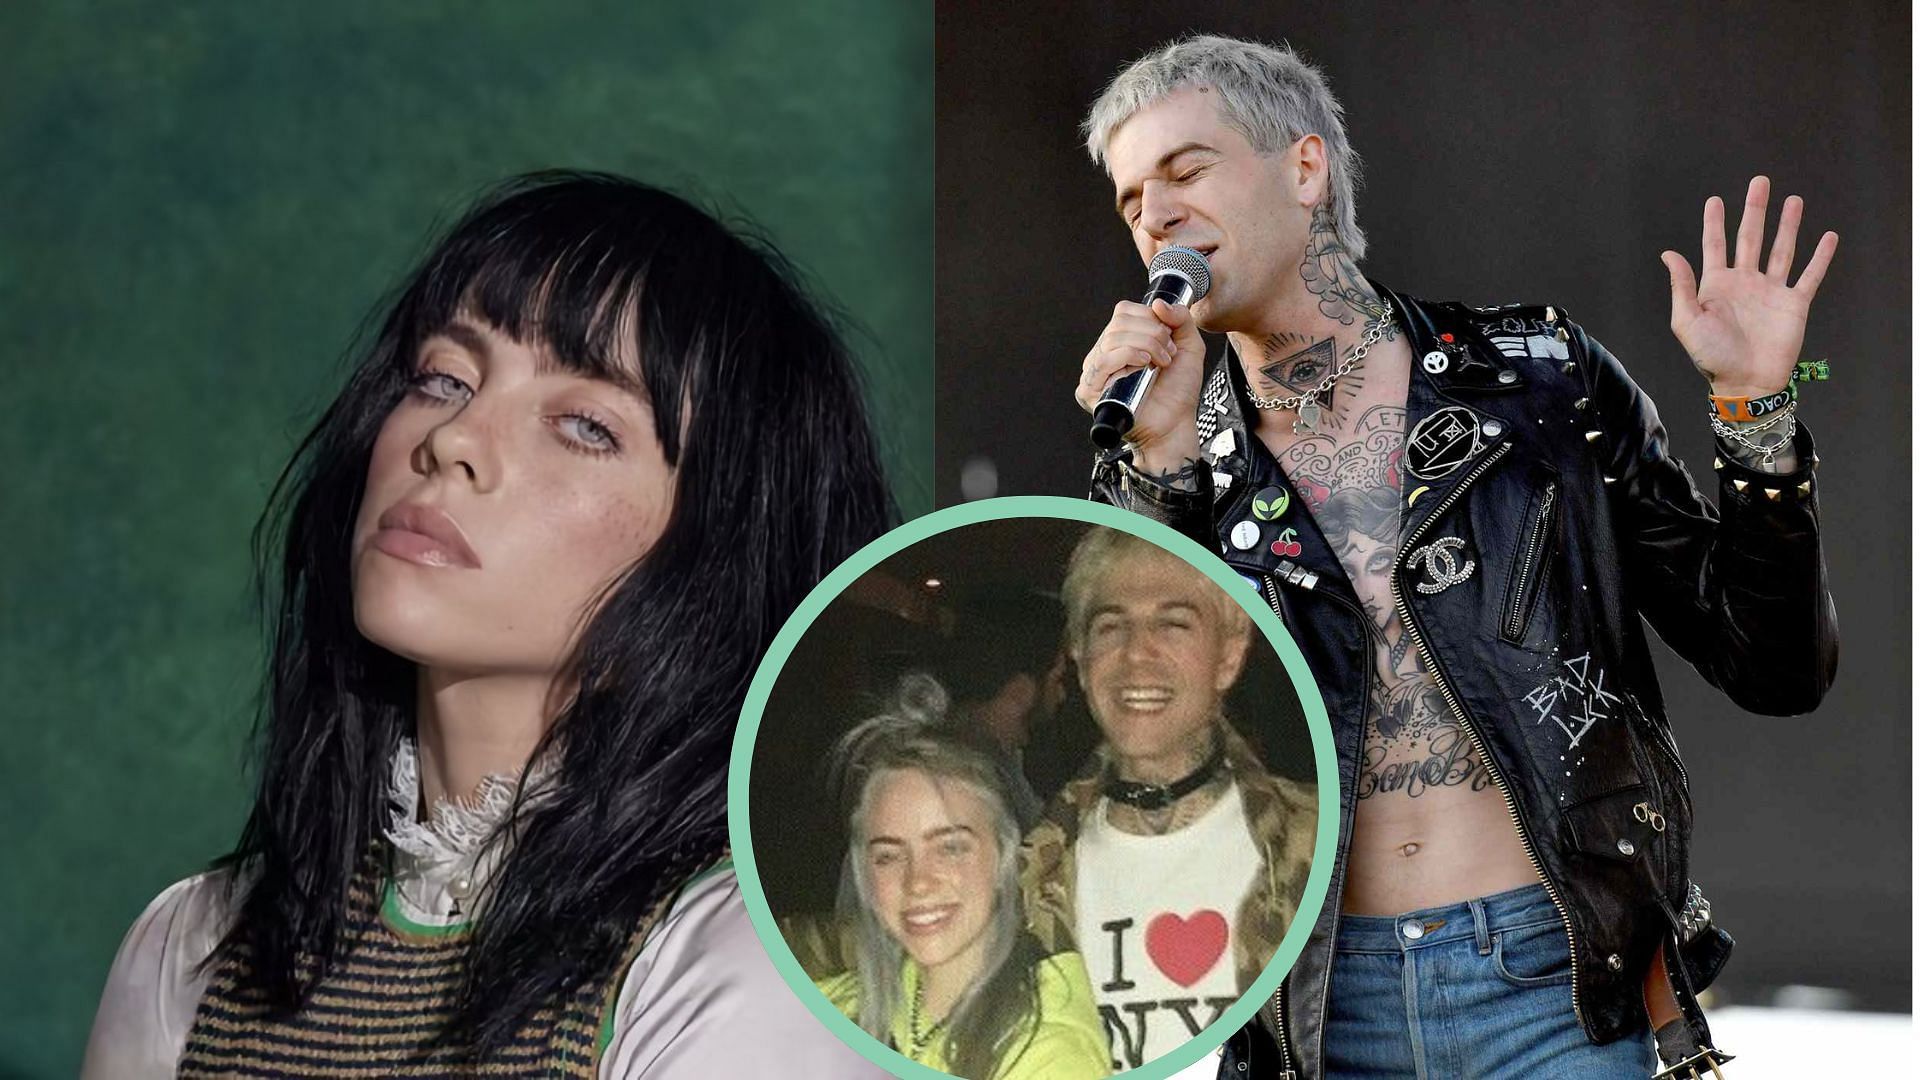 Billie Eilish and Jesse Rutherford are in a relationship (image via Apple Music and Getty Images)